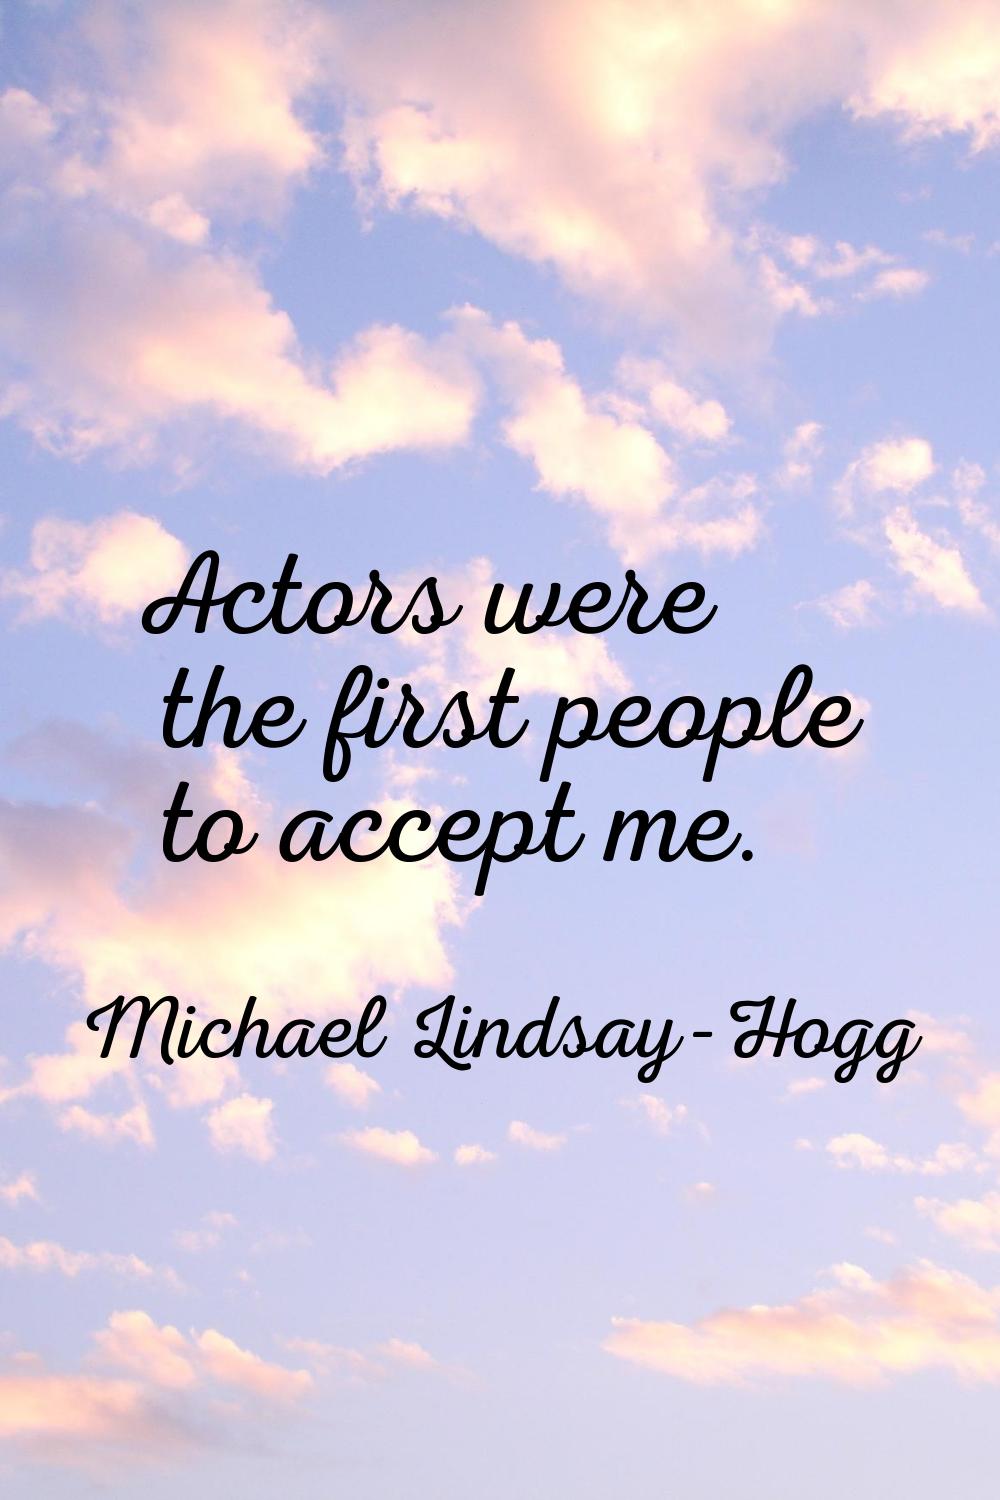 Actors were the first people to accept me.